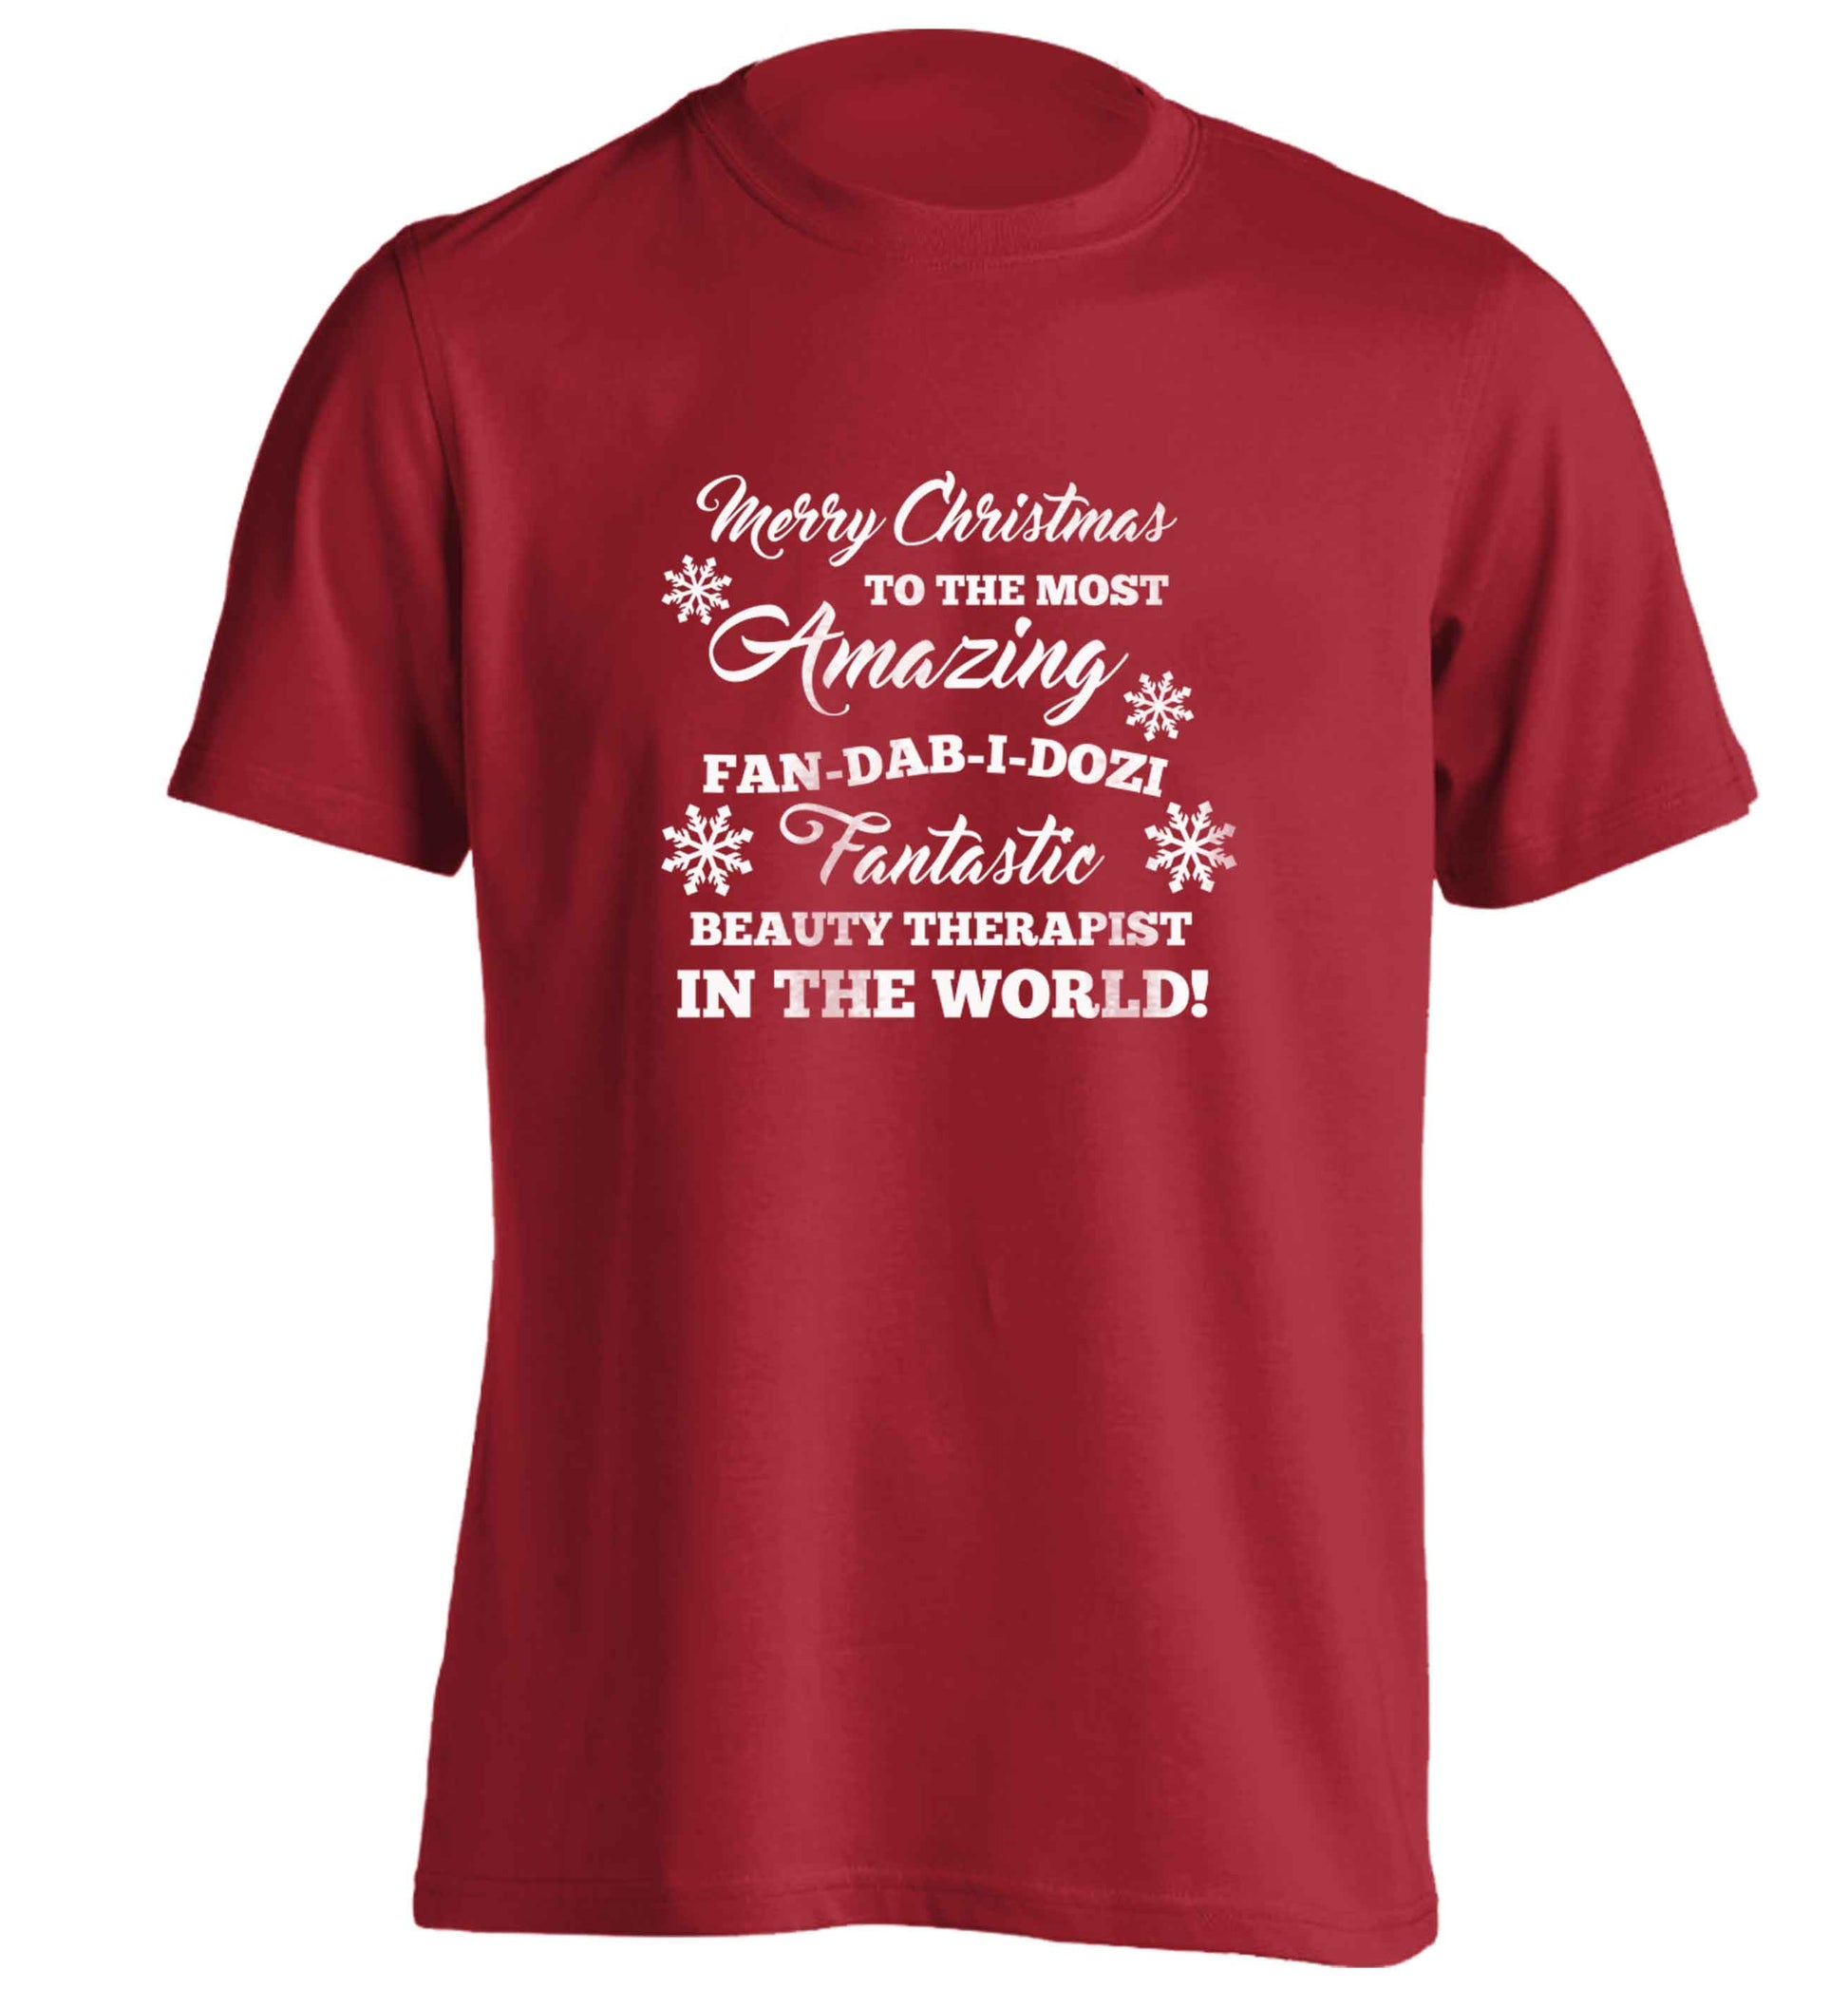 Merry Christmas to the most amazing fan-dab-i-dozi fantasic beauty therapist in the world adults unisex red Tshirt 2XL